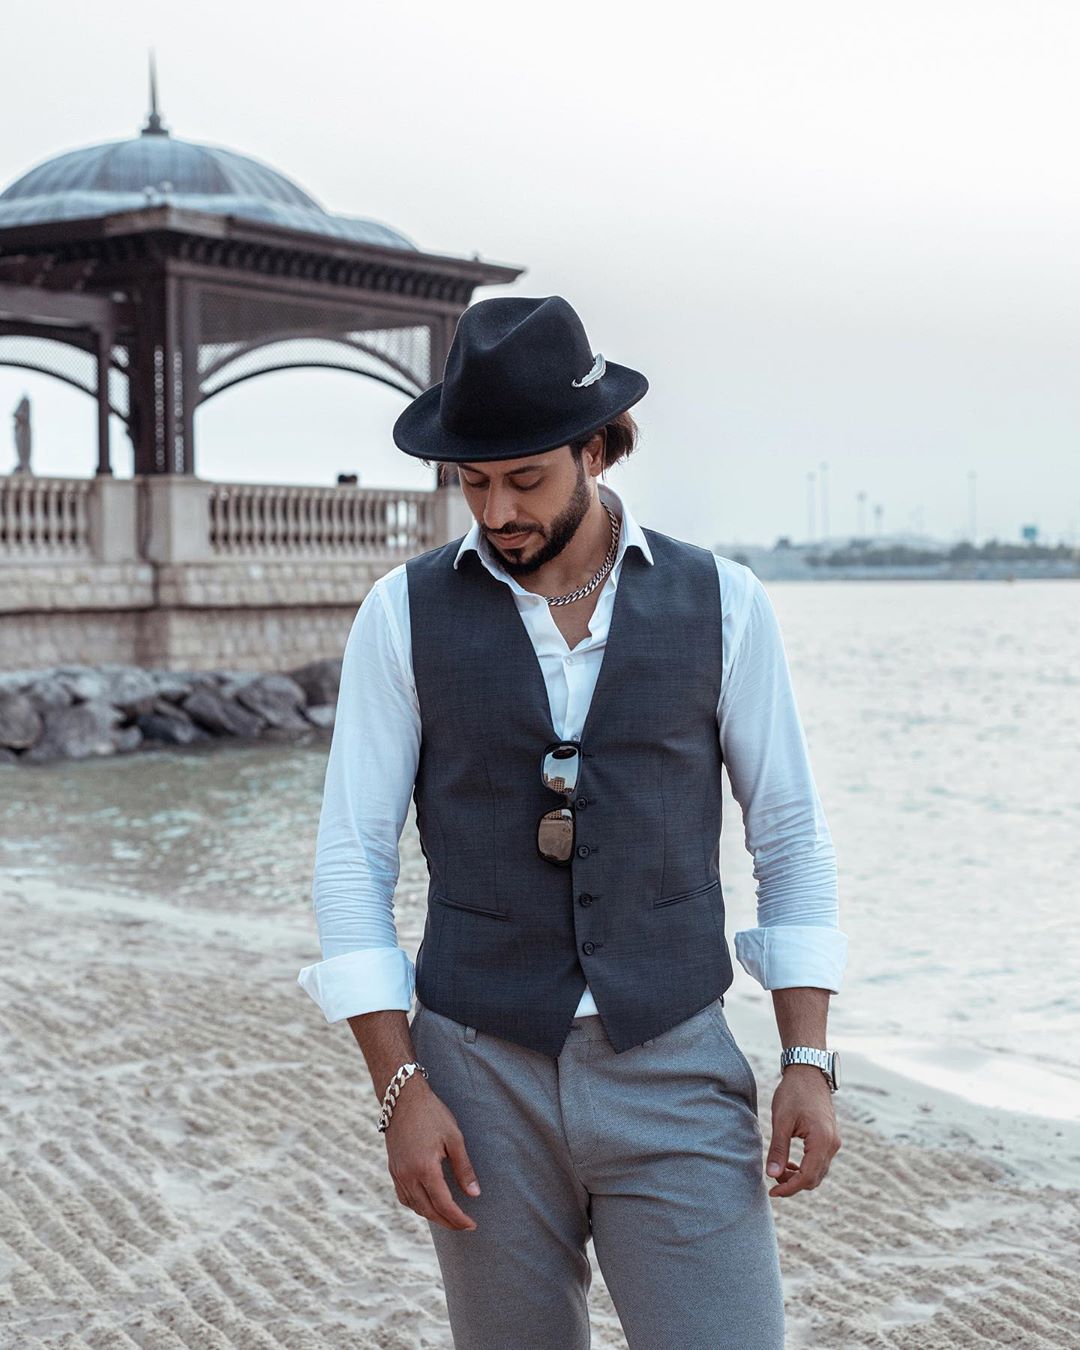 An Arab man wearing smart casual European clothing poses with a serious expression on a beach in Abu Dhabi with the city skyline behind him.